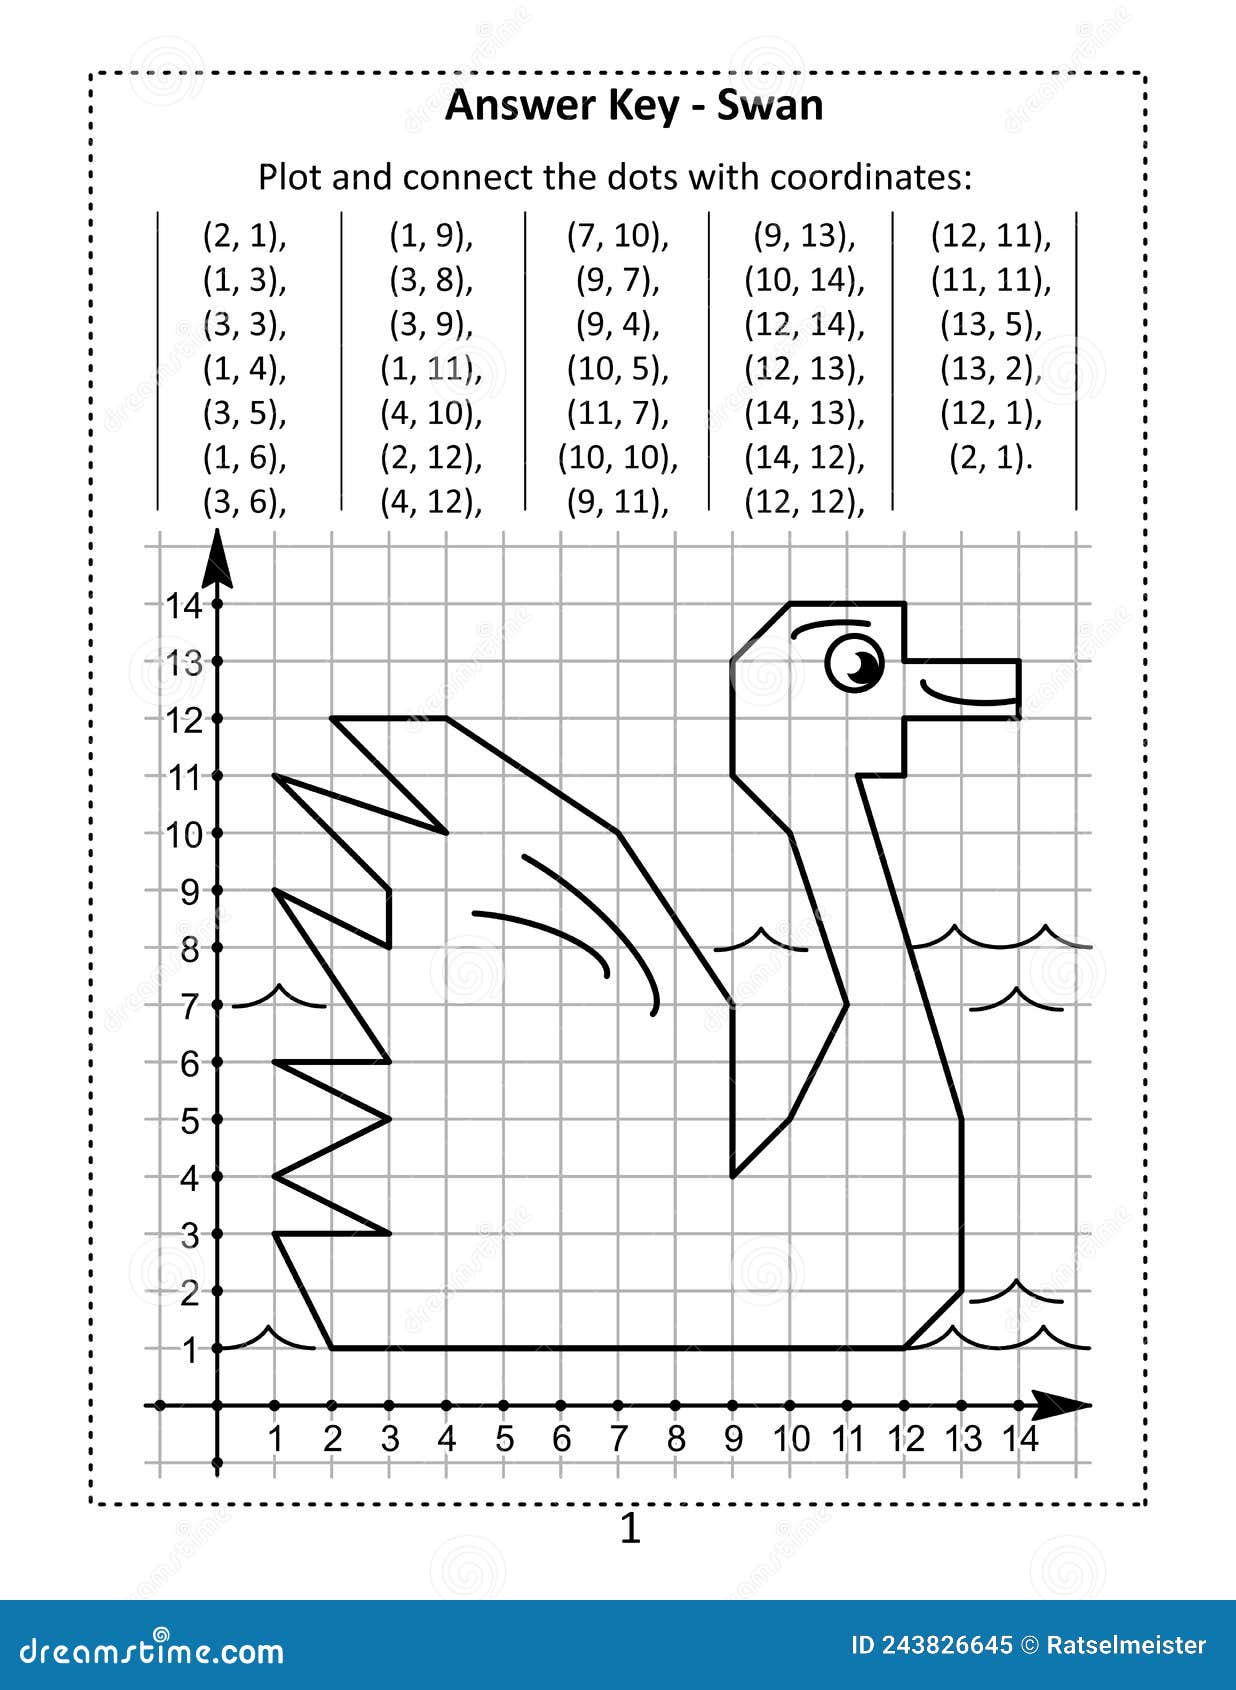 this is answer key page for coordinate graphing, or drawing by coordinates, math worksheet with swan